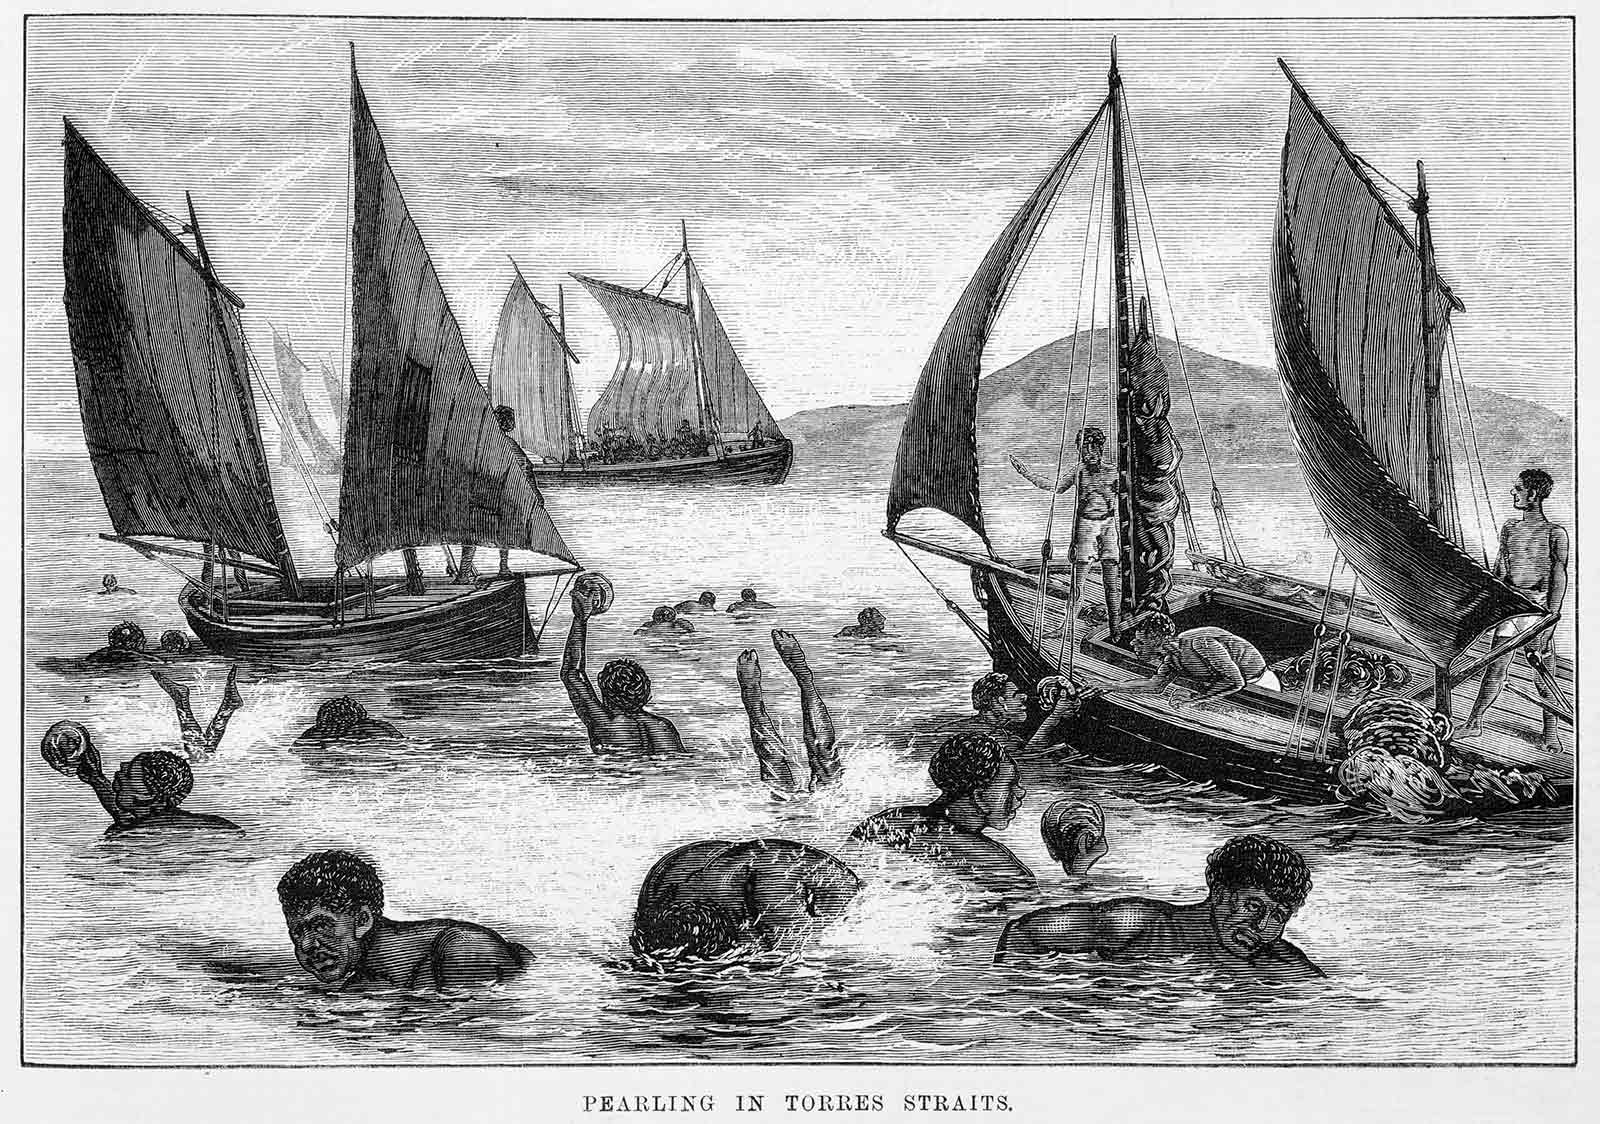 Black and white sketch of pearl divers and luggers.